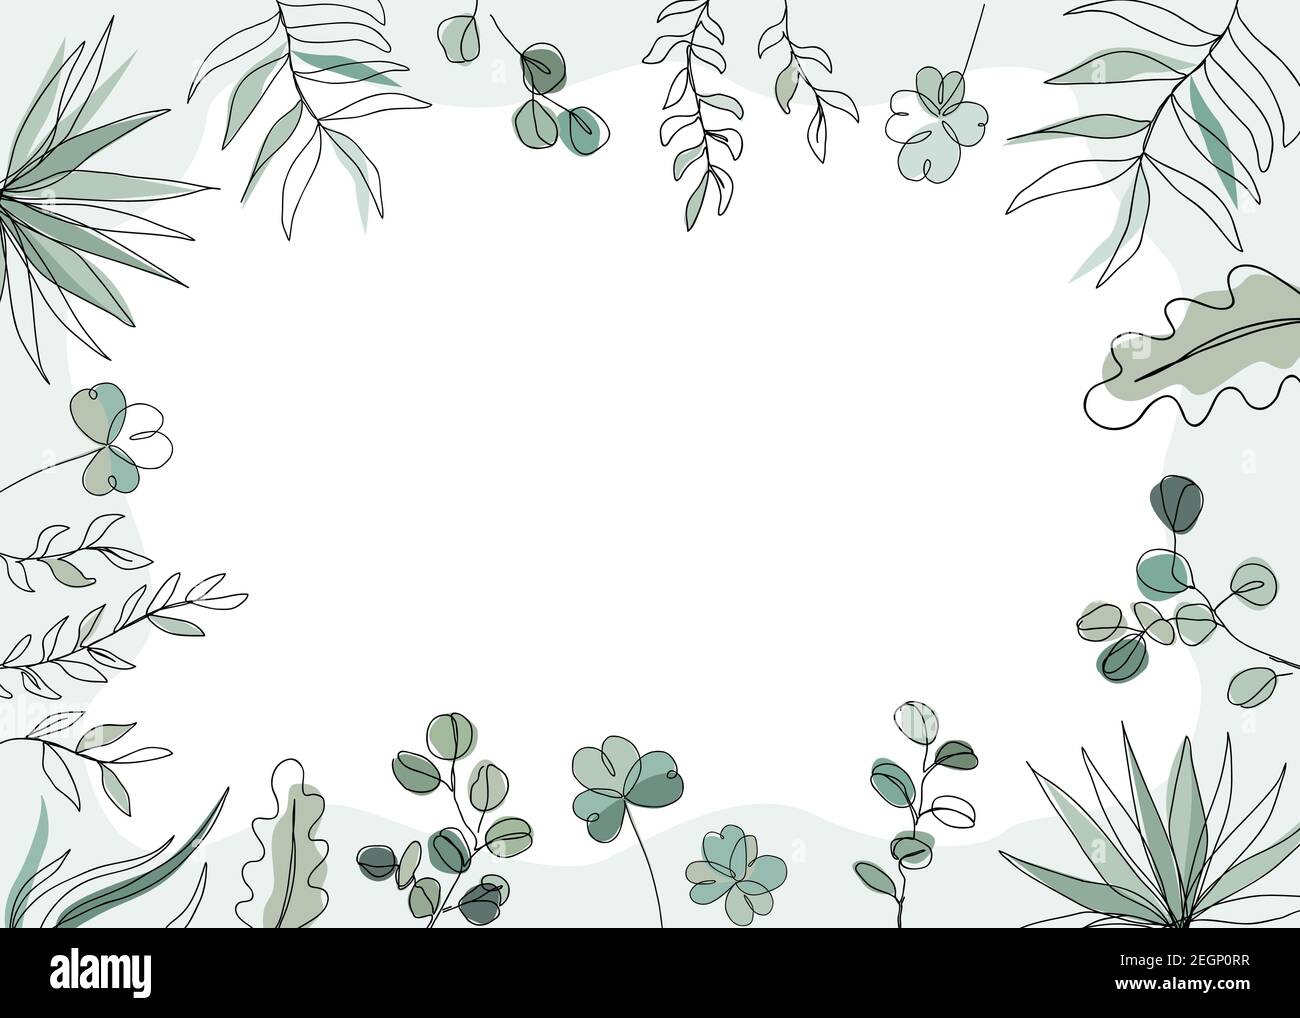 Floral vector illustration in trendy continuous line drawing style. Plants and leaves frame background with copy space for text Stock Vector